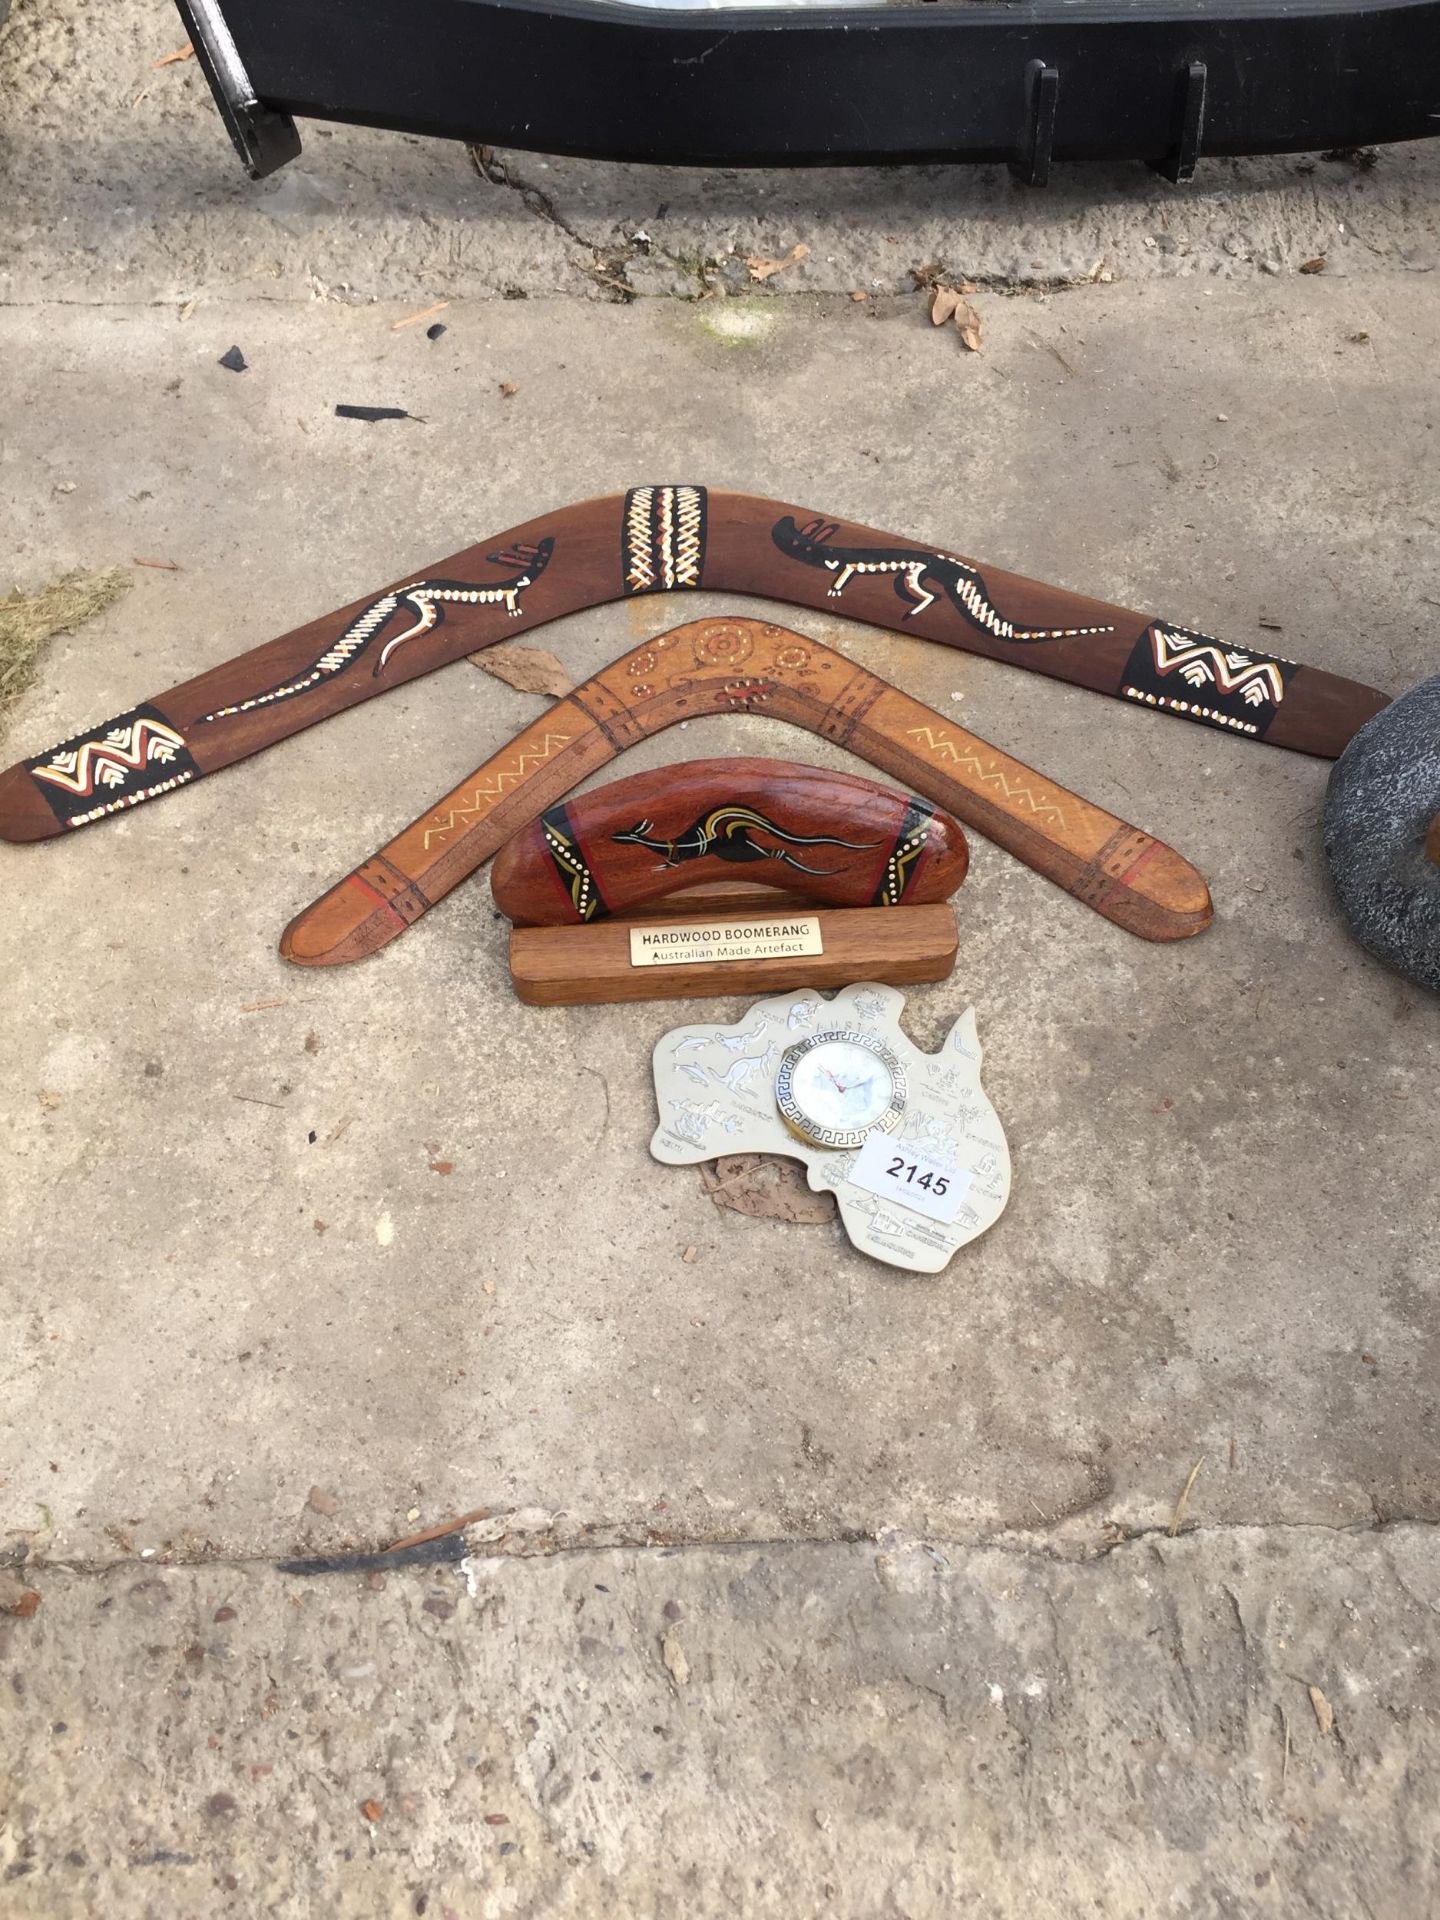 THREE WOODEN BOOMERANGS AND A CLOCK SET IN A MAP OF AUSTRALIA